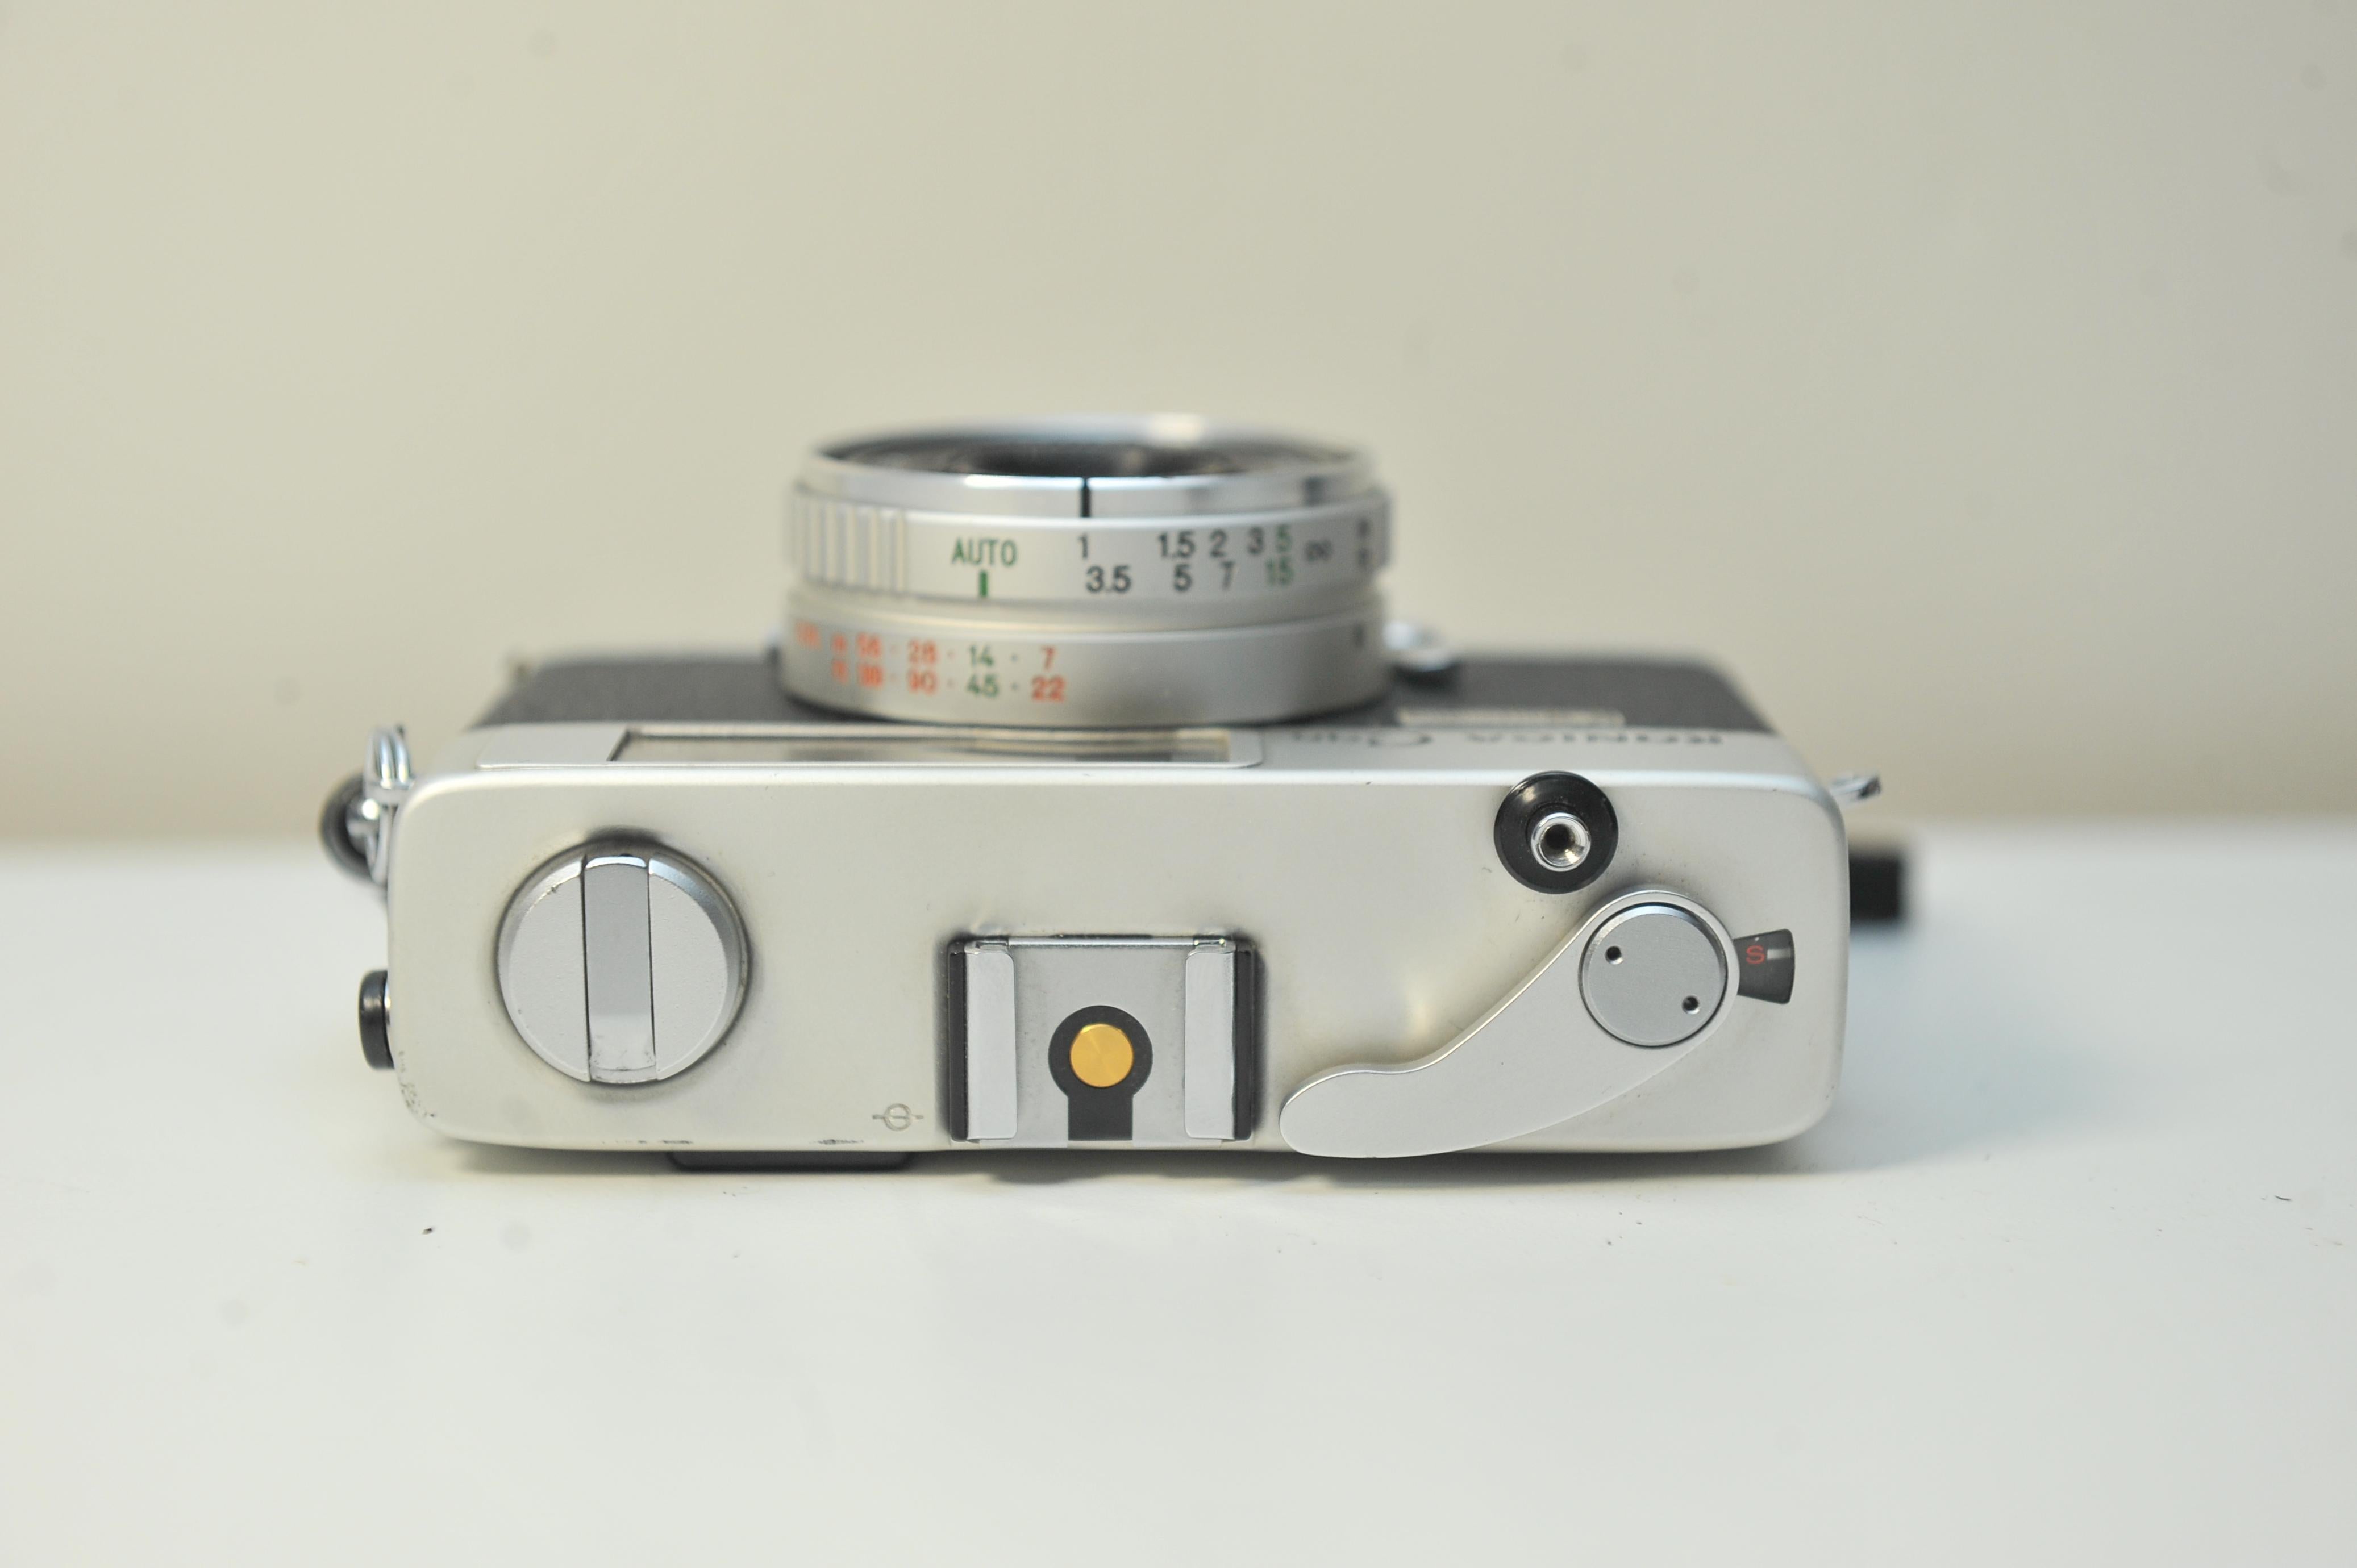 Japanese Konica C35 Automatic 35mm Film Compact Rangefinder Camera with 38mm Hexanon F2.8 For Sale